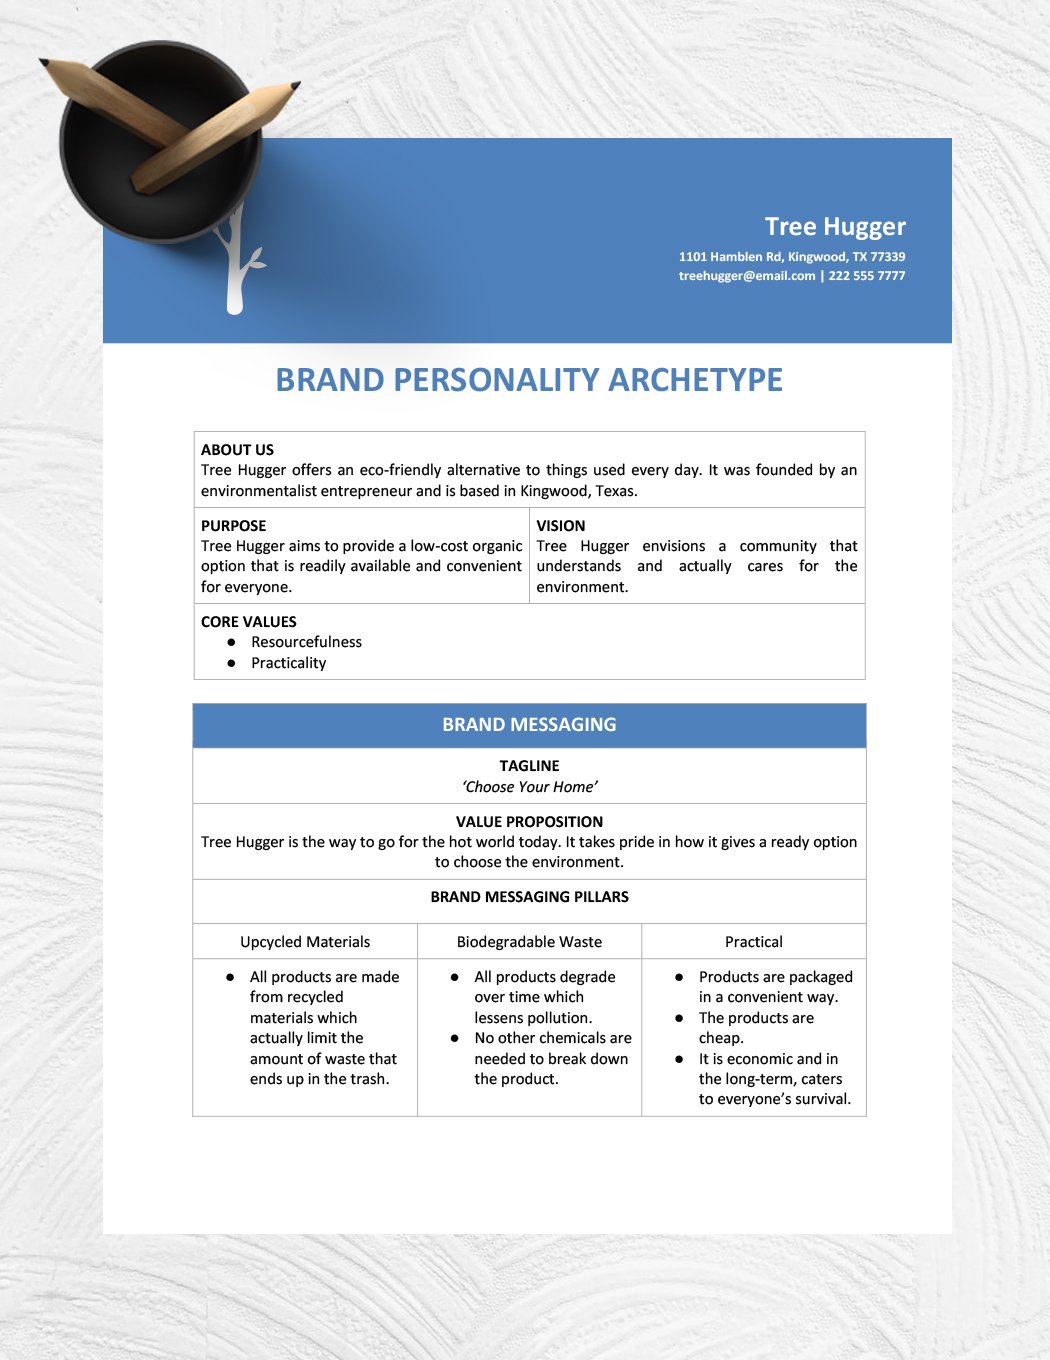 Brand Personality Archetype Template